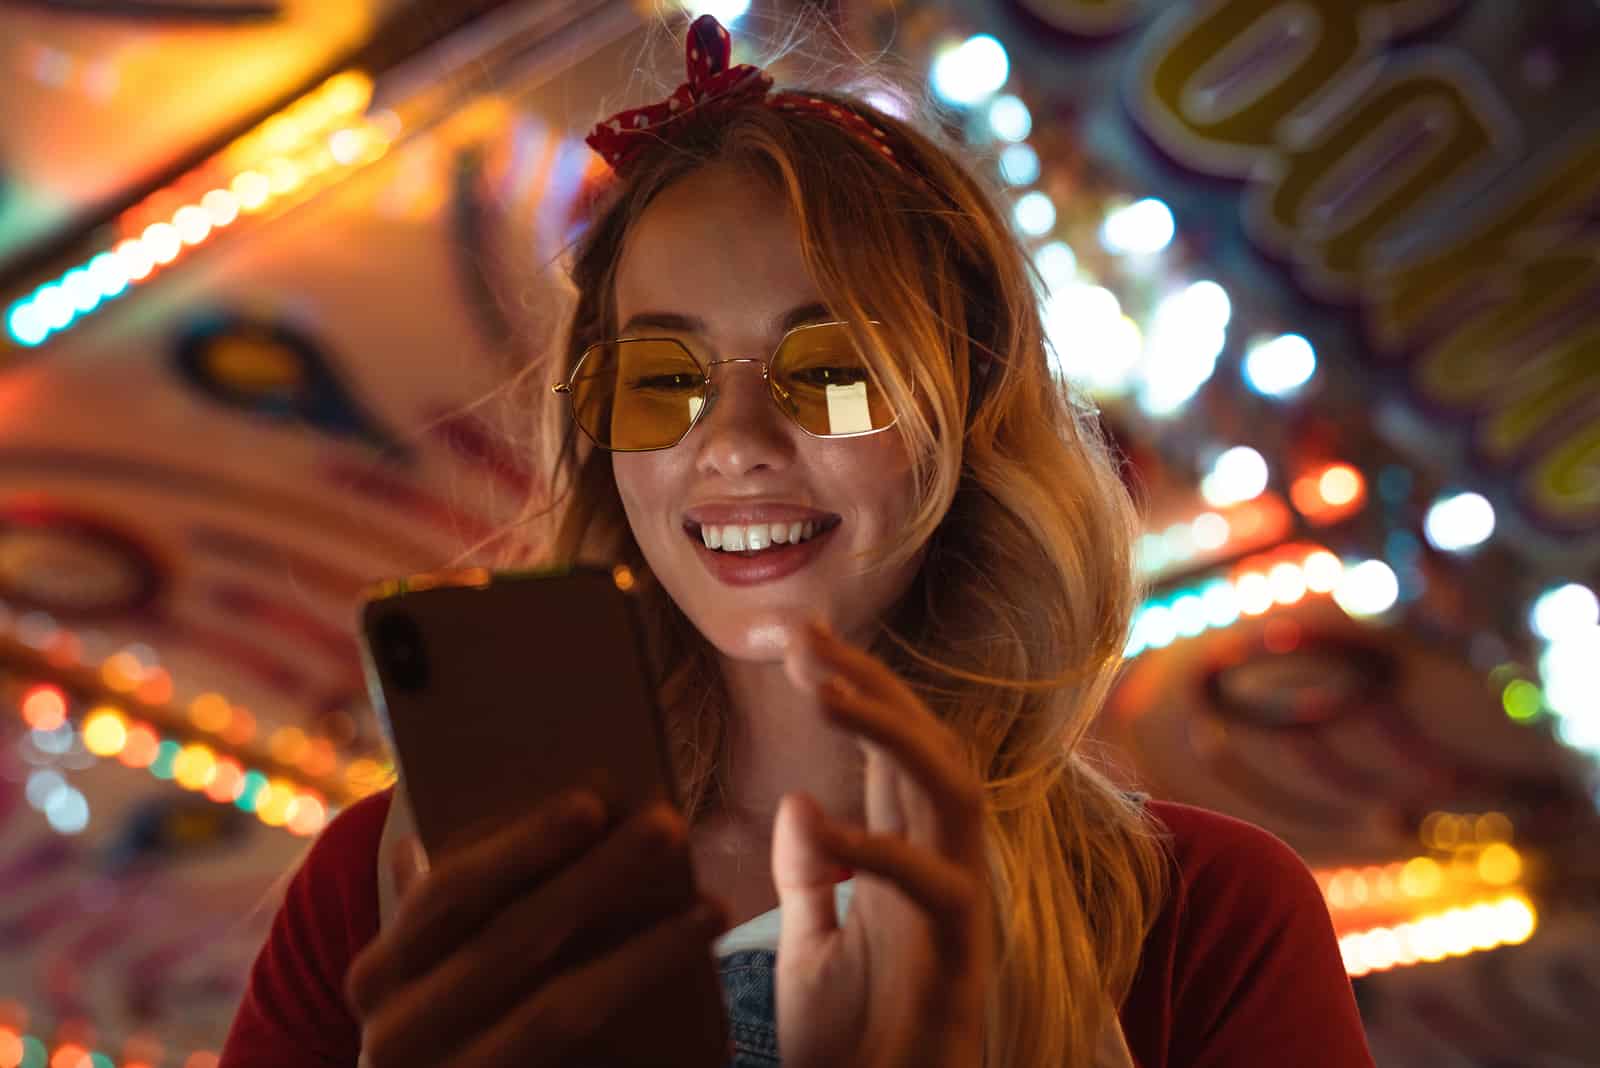 woman with sunglasses using phone